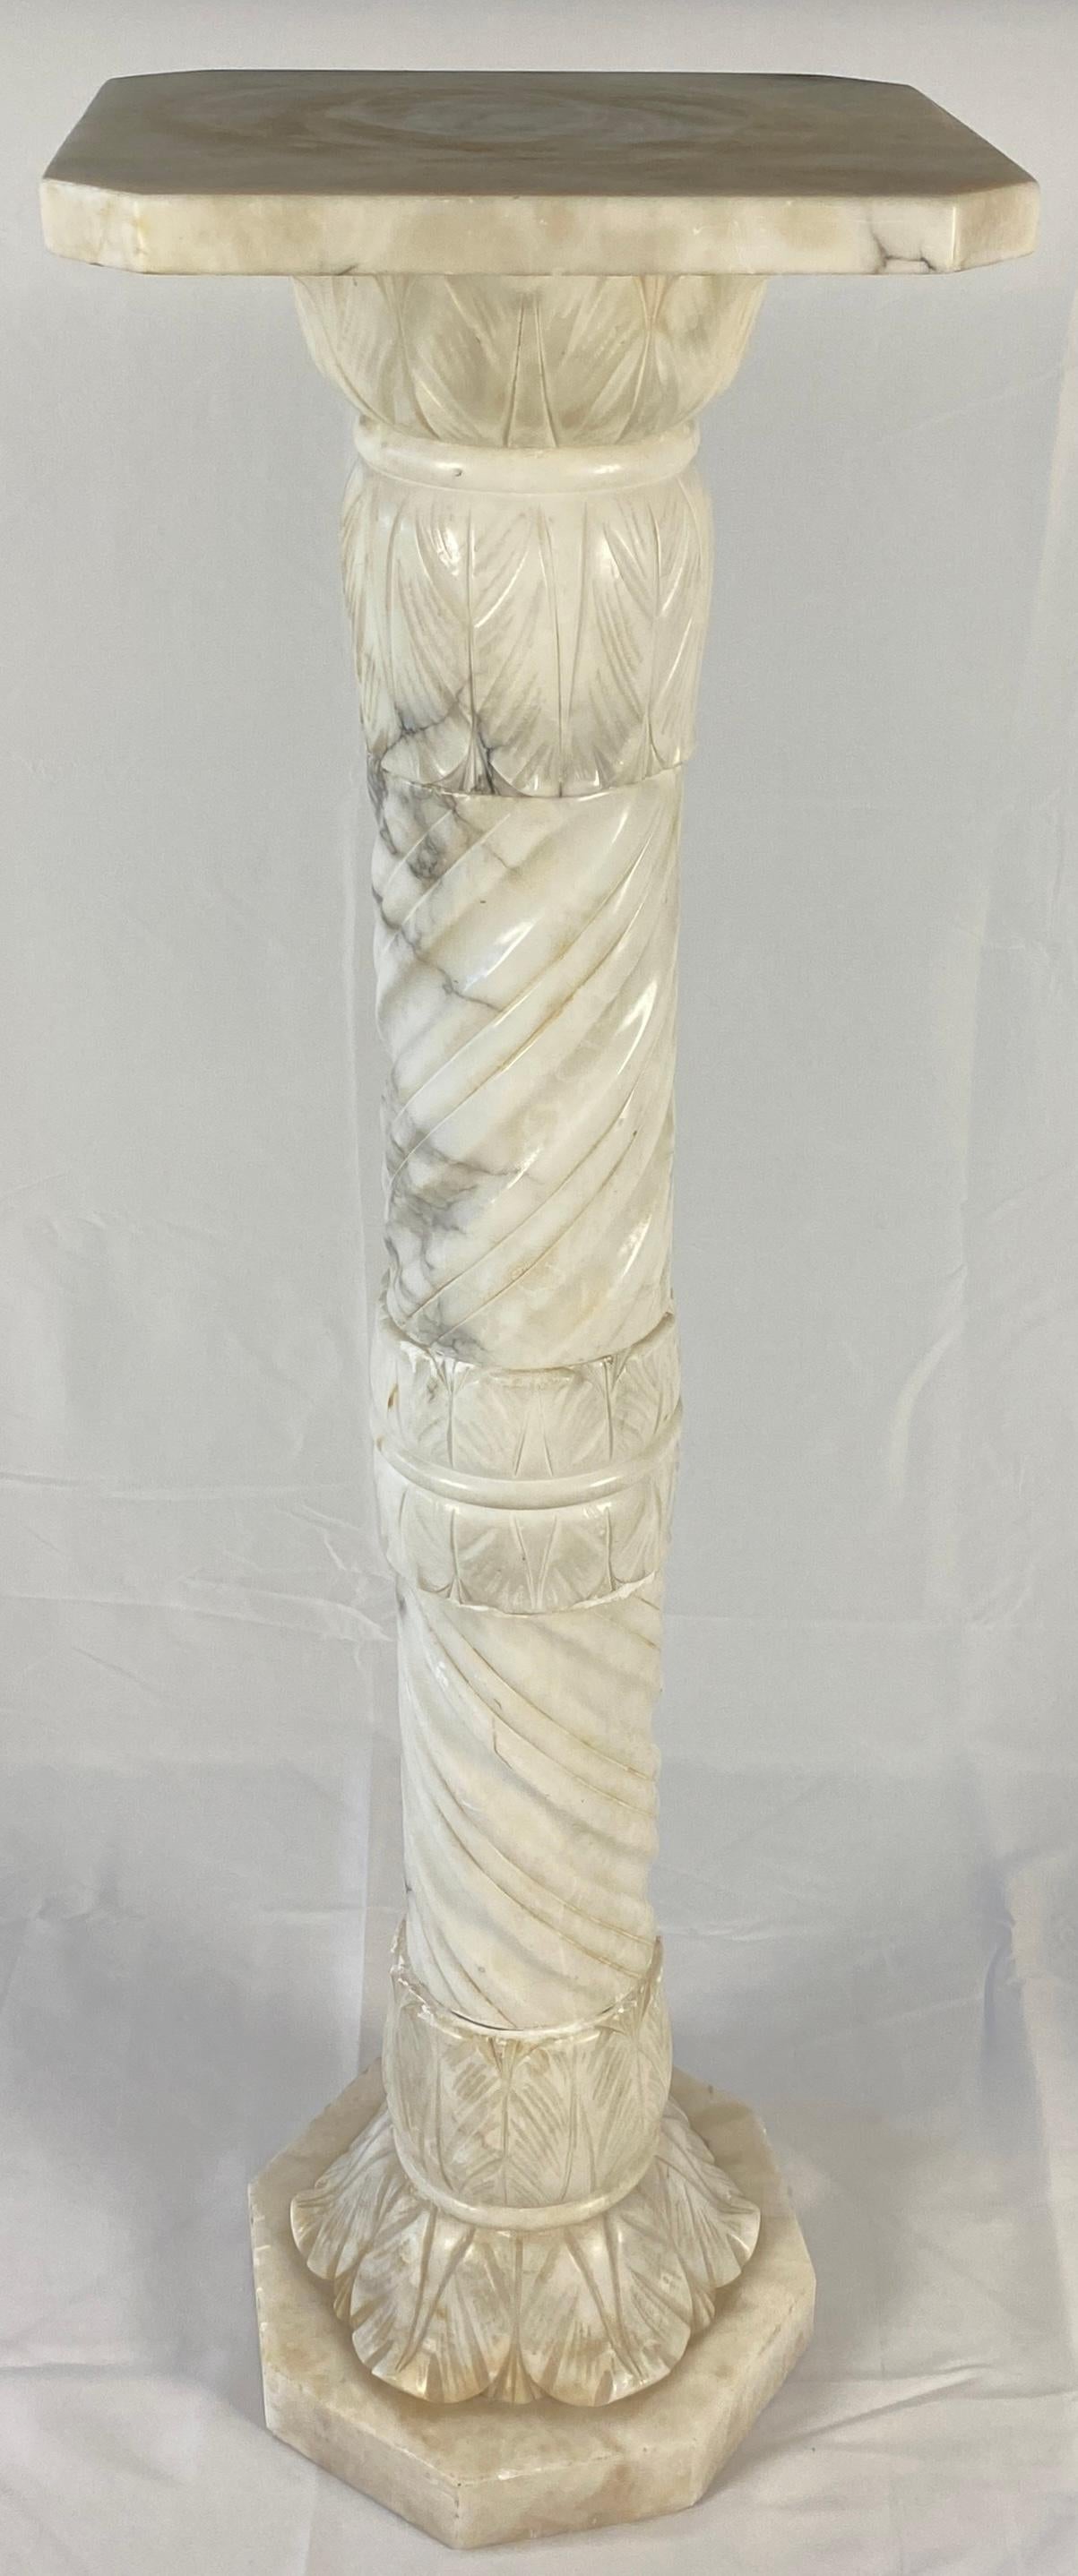 19th Century Italian Hand-Carved Carrara Marble Pedestal or Decorative Stand For Sale 4